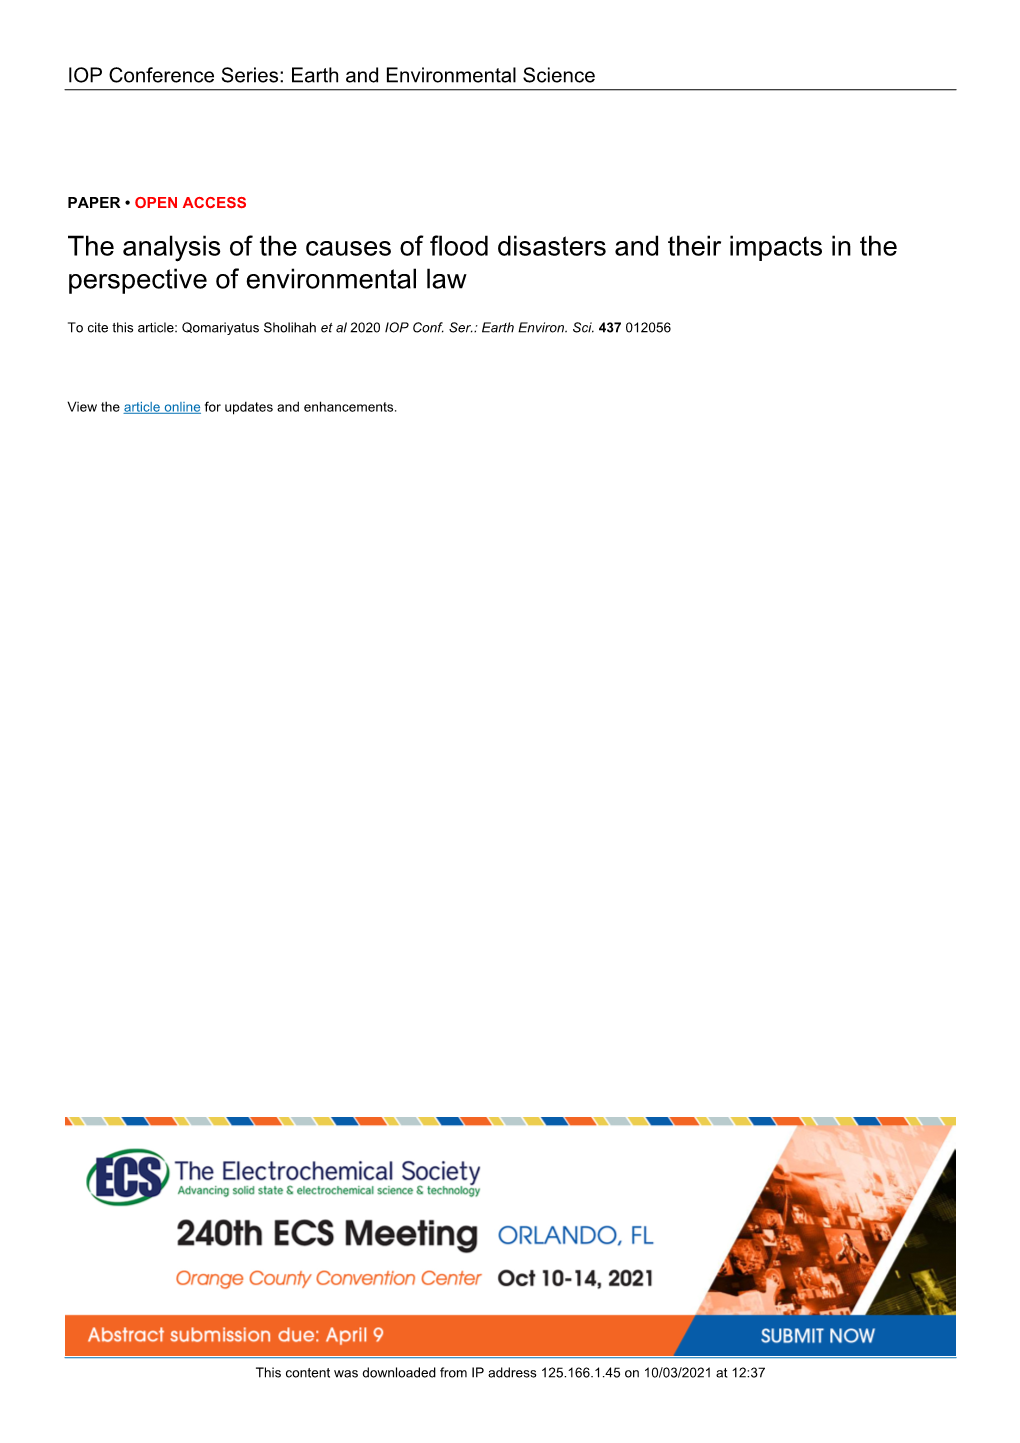 The Analysis of the Causes of Flood Disasters and Their Impacts in the Perspective of Environmental Law